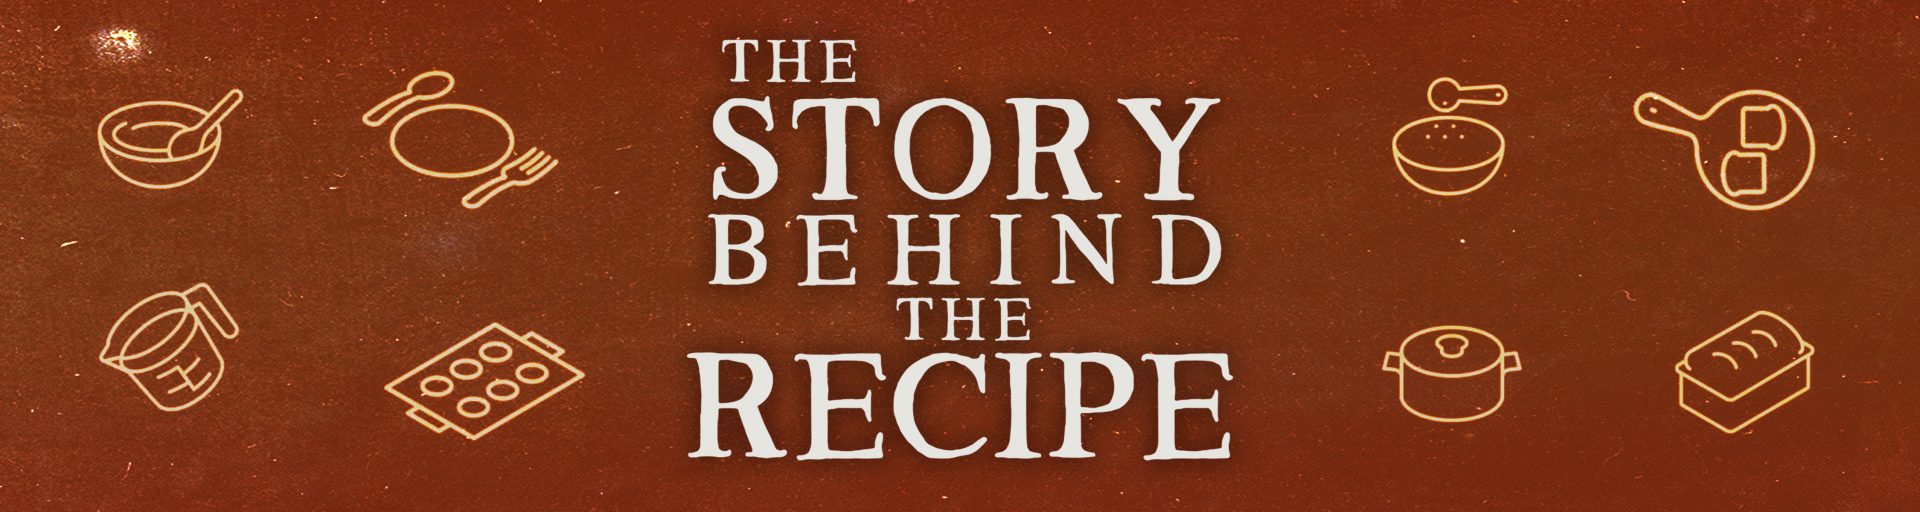 The Story Behind the Recipe title